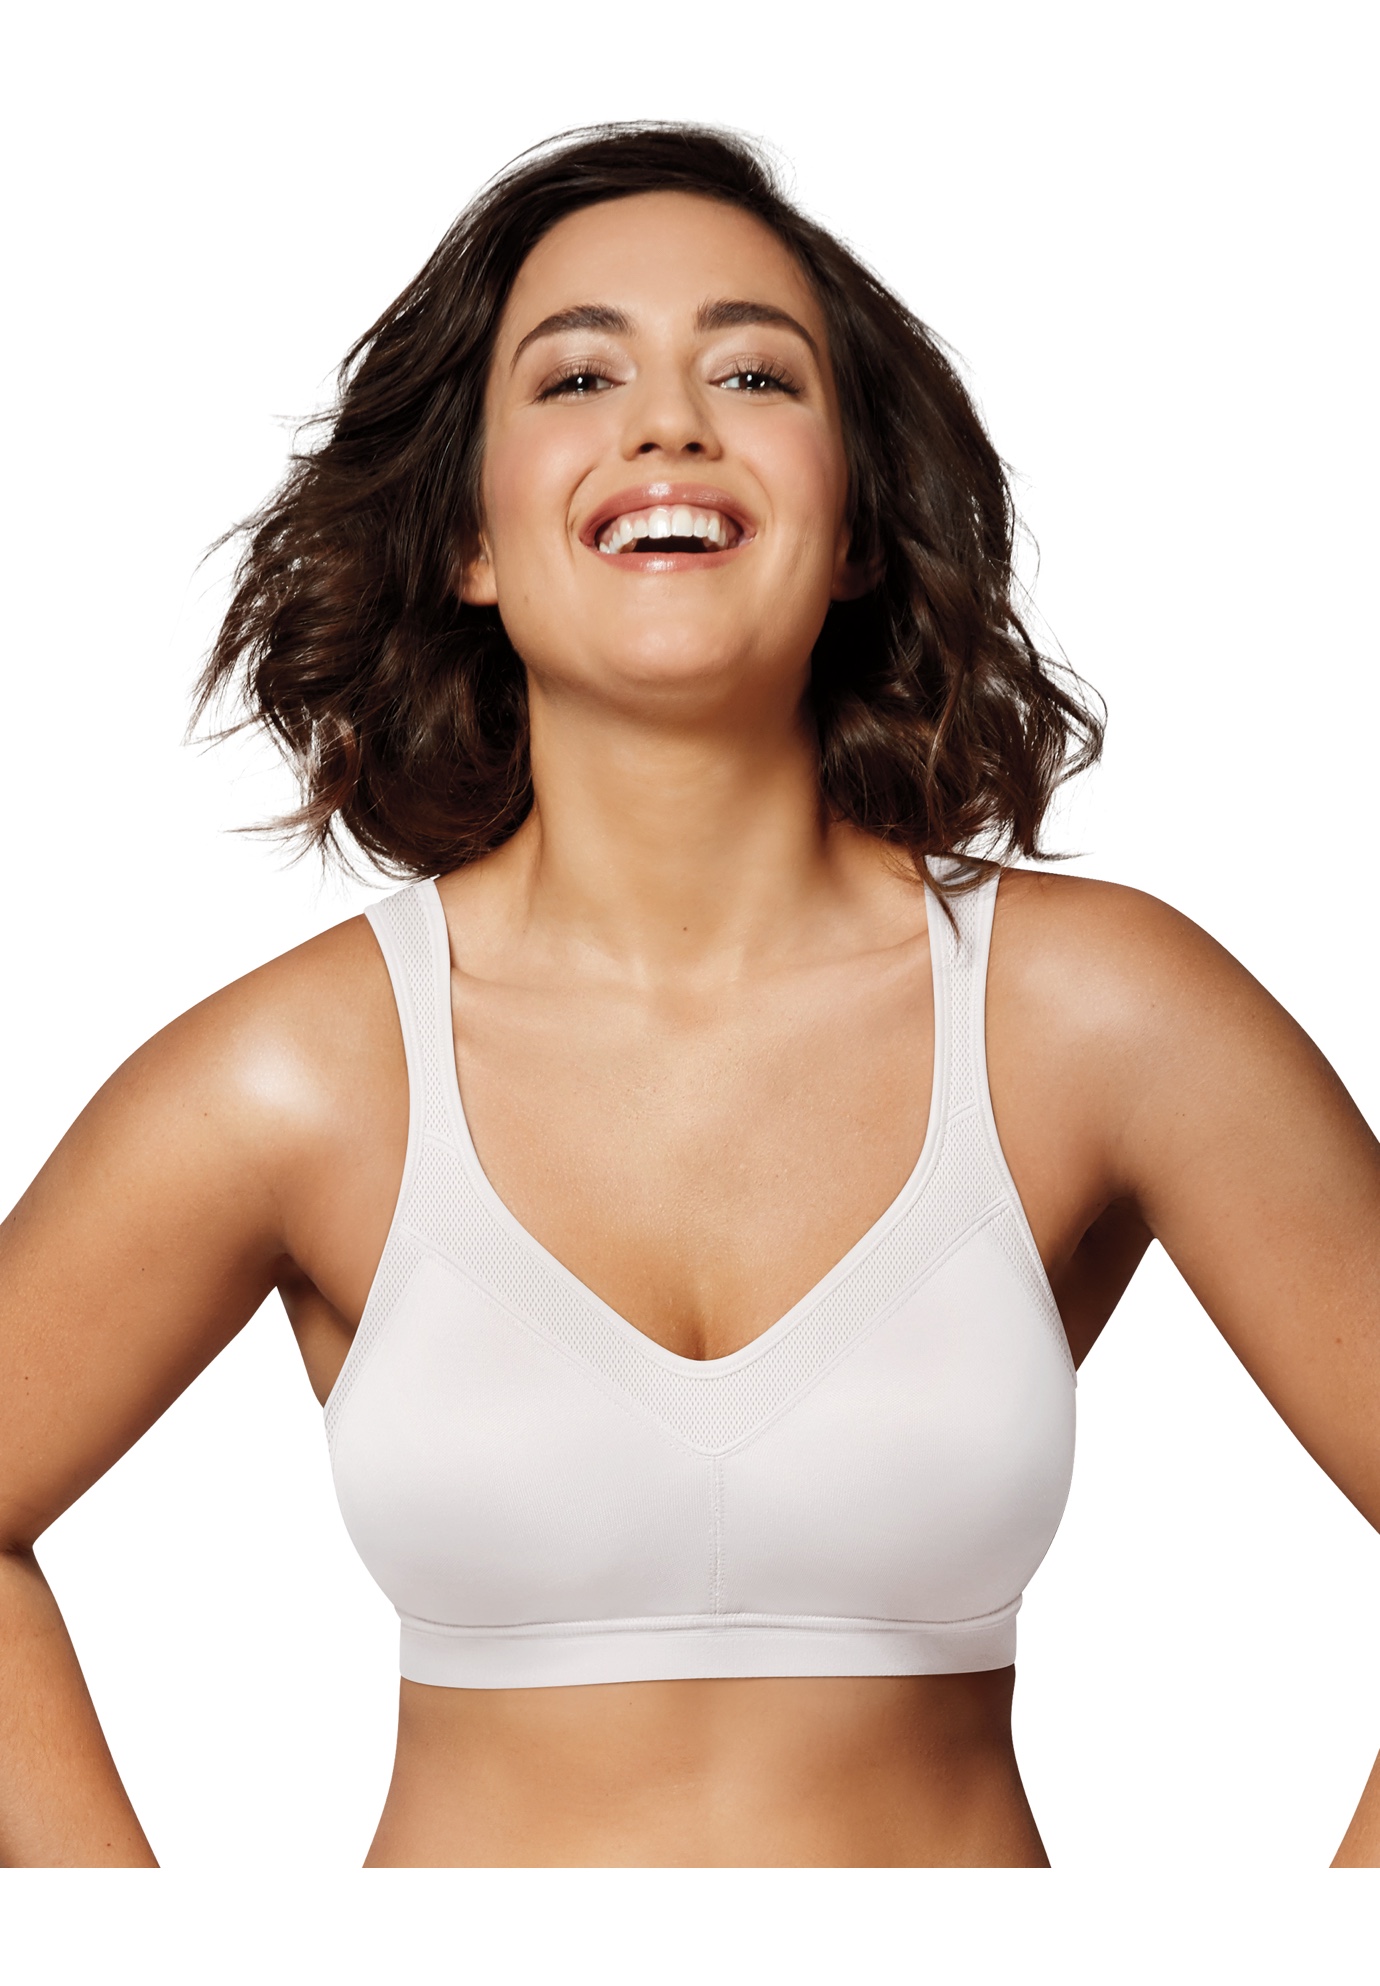 PLAYTEX 18 HOUR WHITE SATIN 4695 FRONT CLOSE FLEX back WIRE FREE